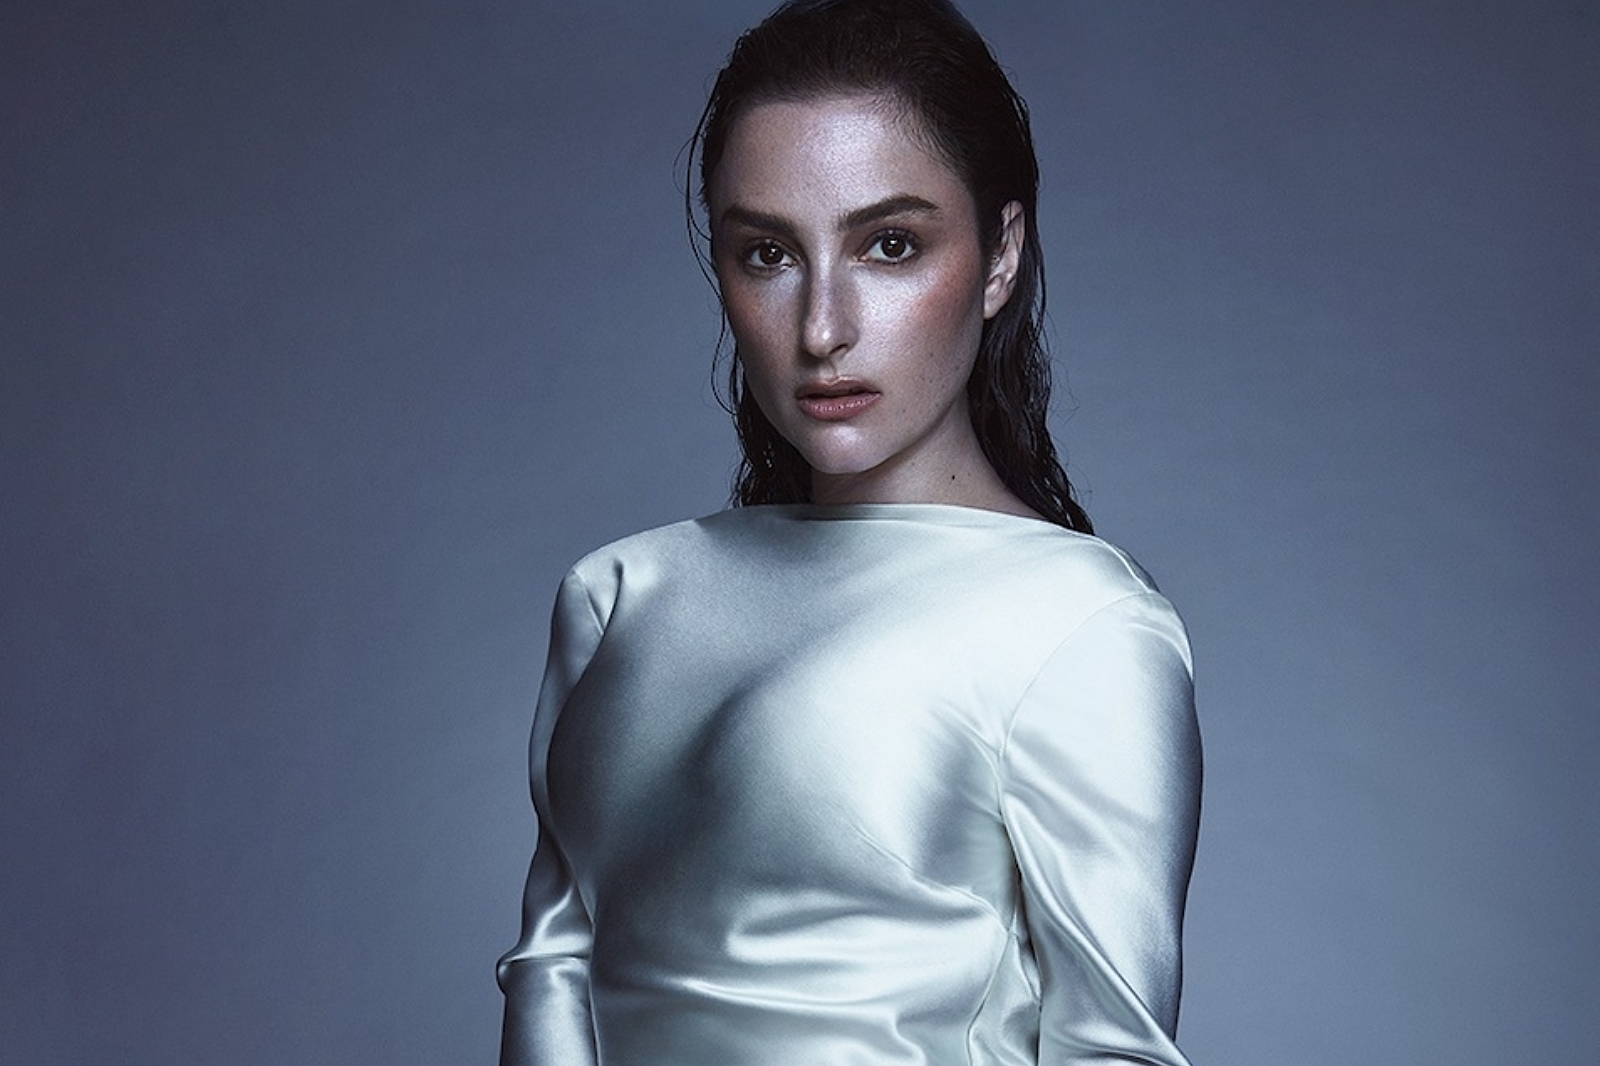 BANKS reveals new track 'Skinnydipped'